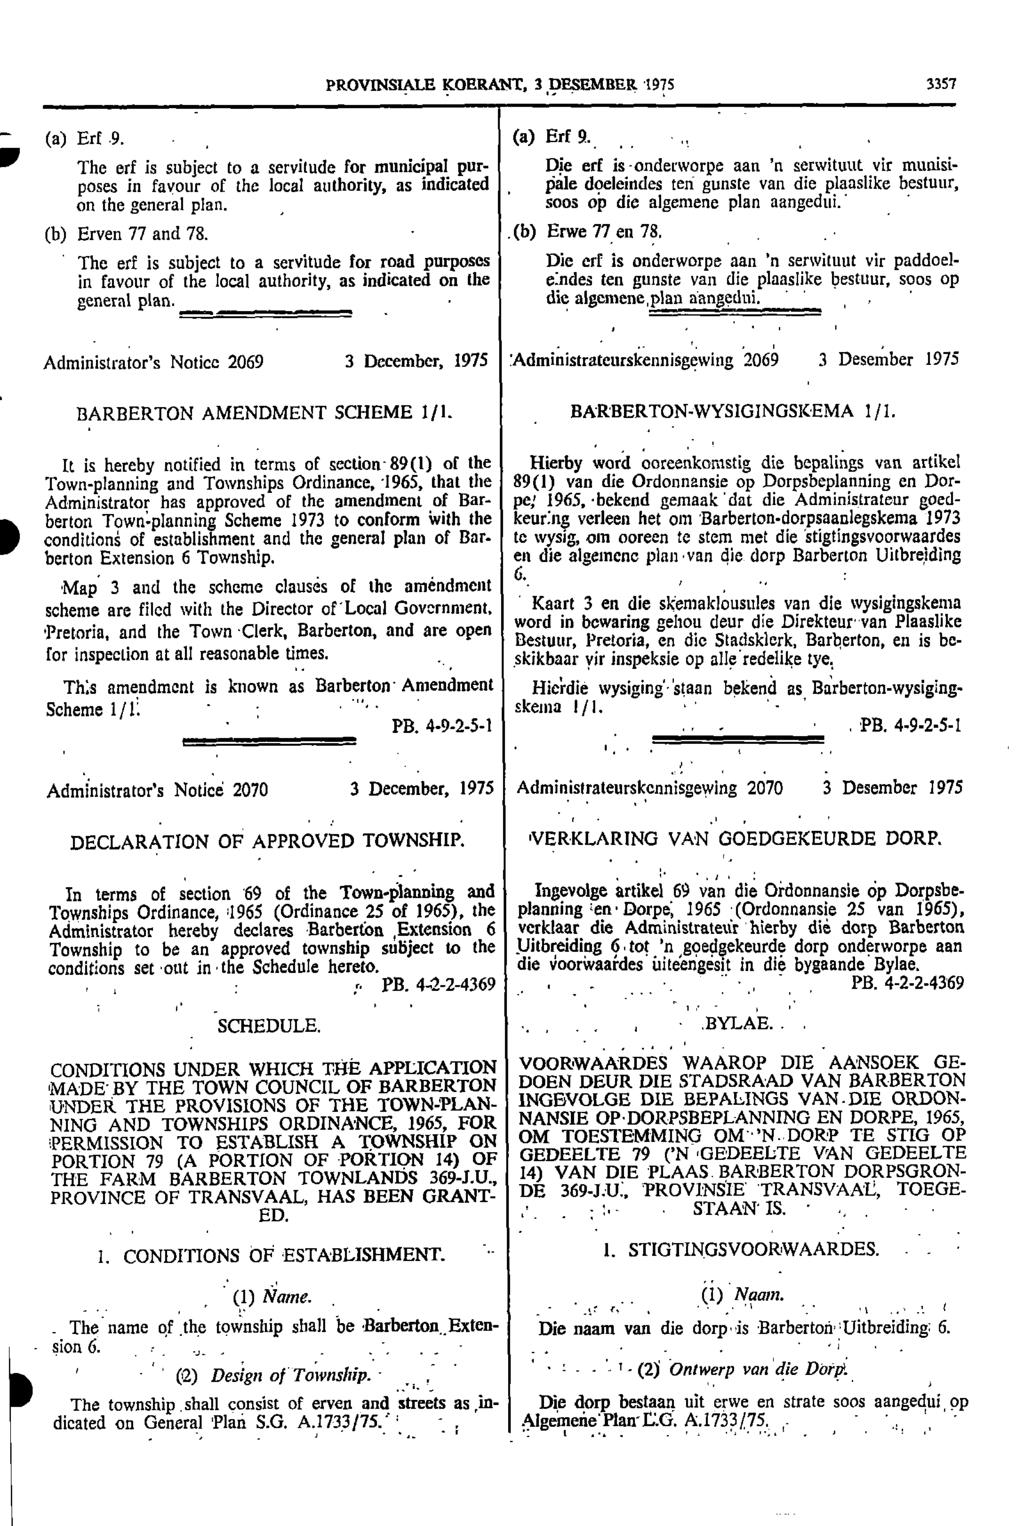 PROVNSALE KOERANT 3 pesettentt 975 3357 ill (a) Erf 9 (a) Erf 9 " The erf is subject to a servitude for municipal pur Die erf is onderworpe aan n serwituut vir munisiposes in favour of the local